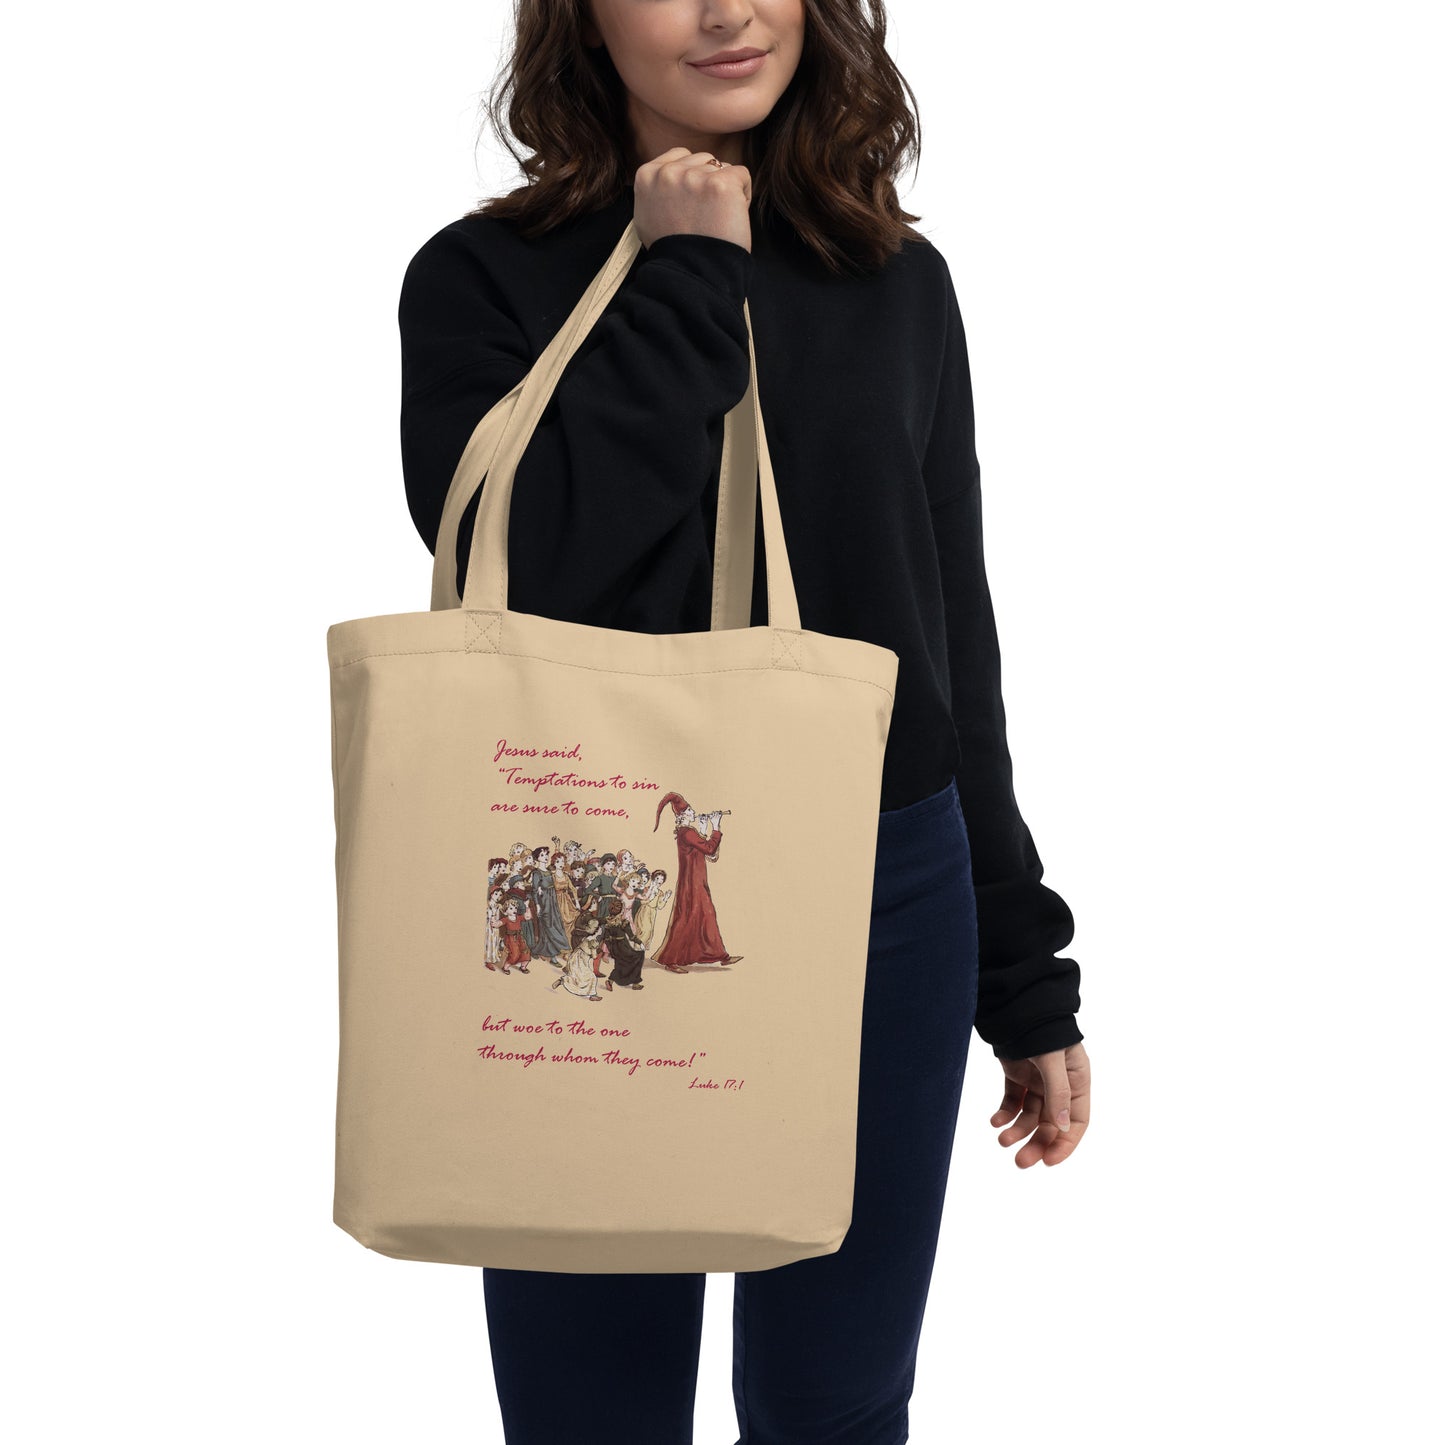 A007 Tote – Eco Tote Bag Featuring Luke 17:1 With a Graphic Depiction of the Pied Piper Leading a Mesmerized Crowd.